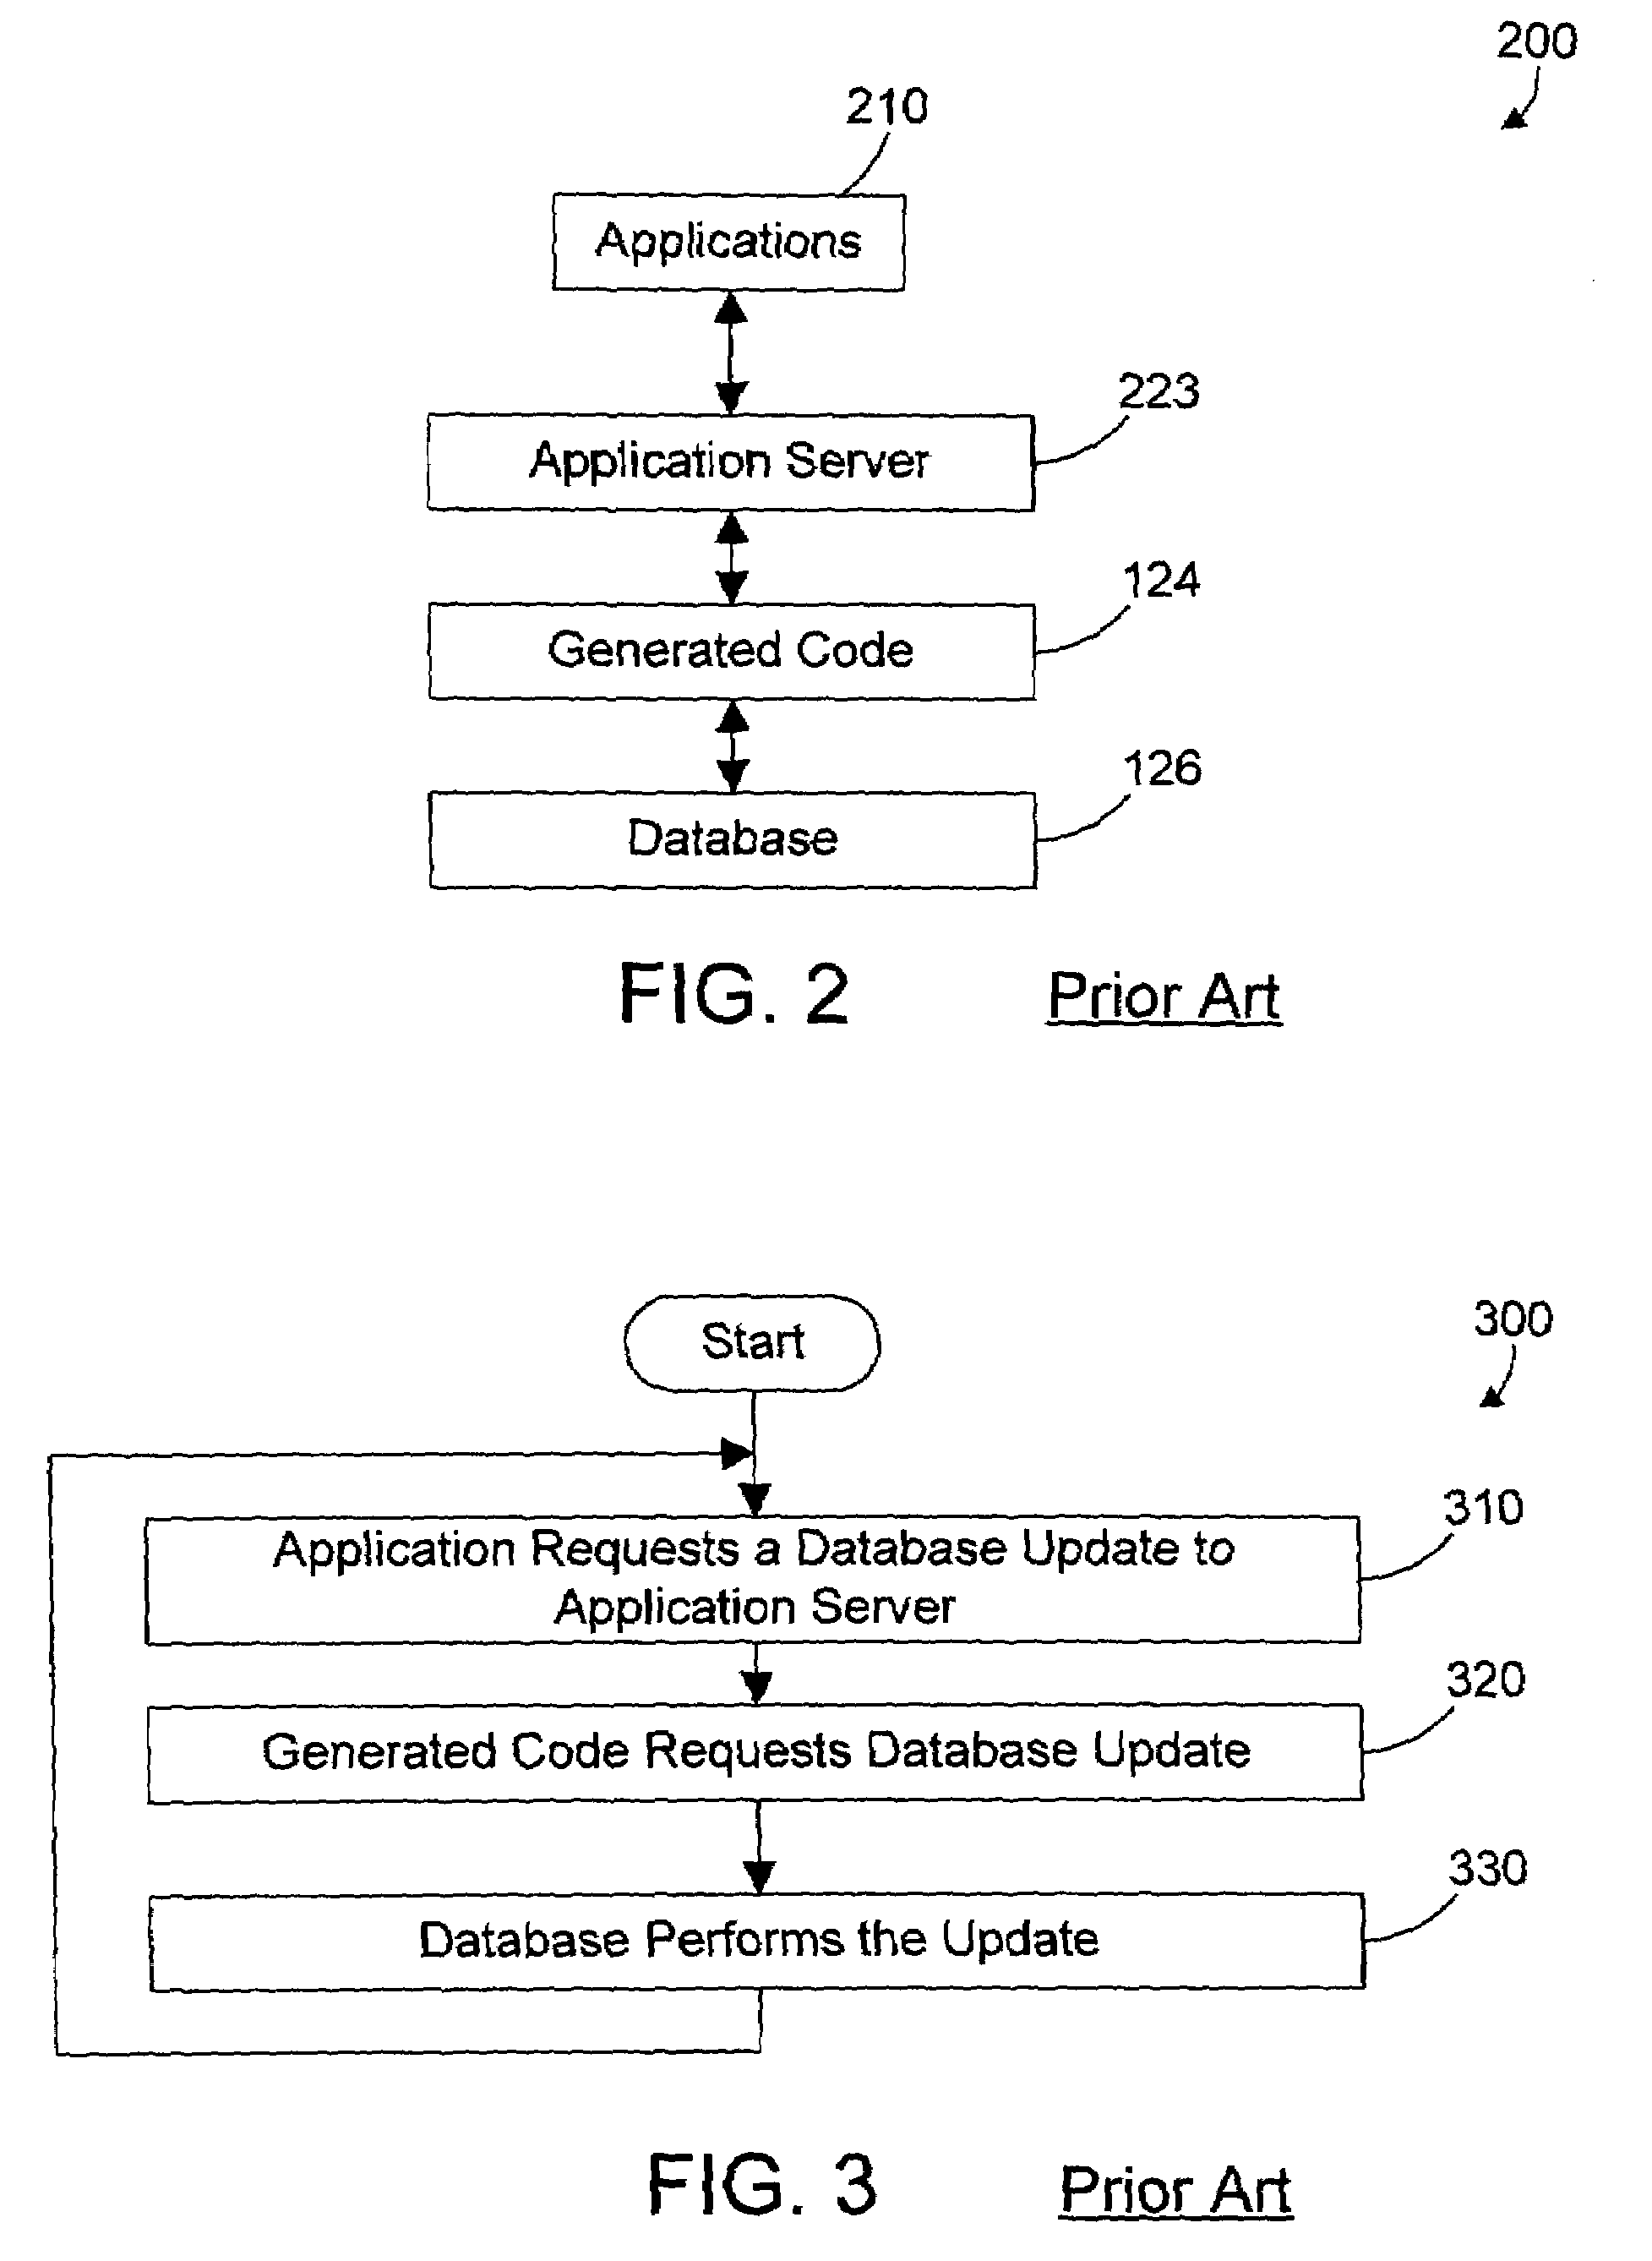 Apparatus and method for enabling database batch updates without modifying generated code